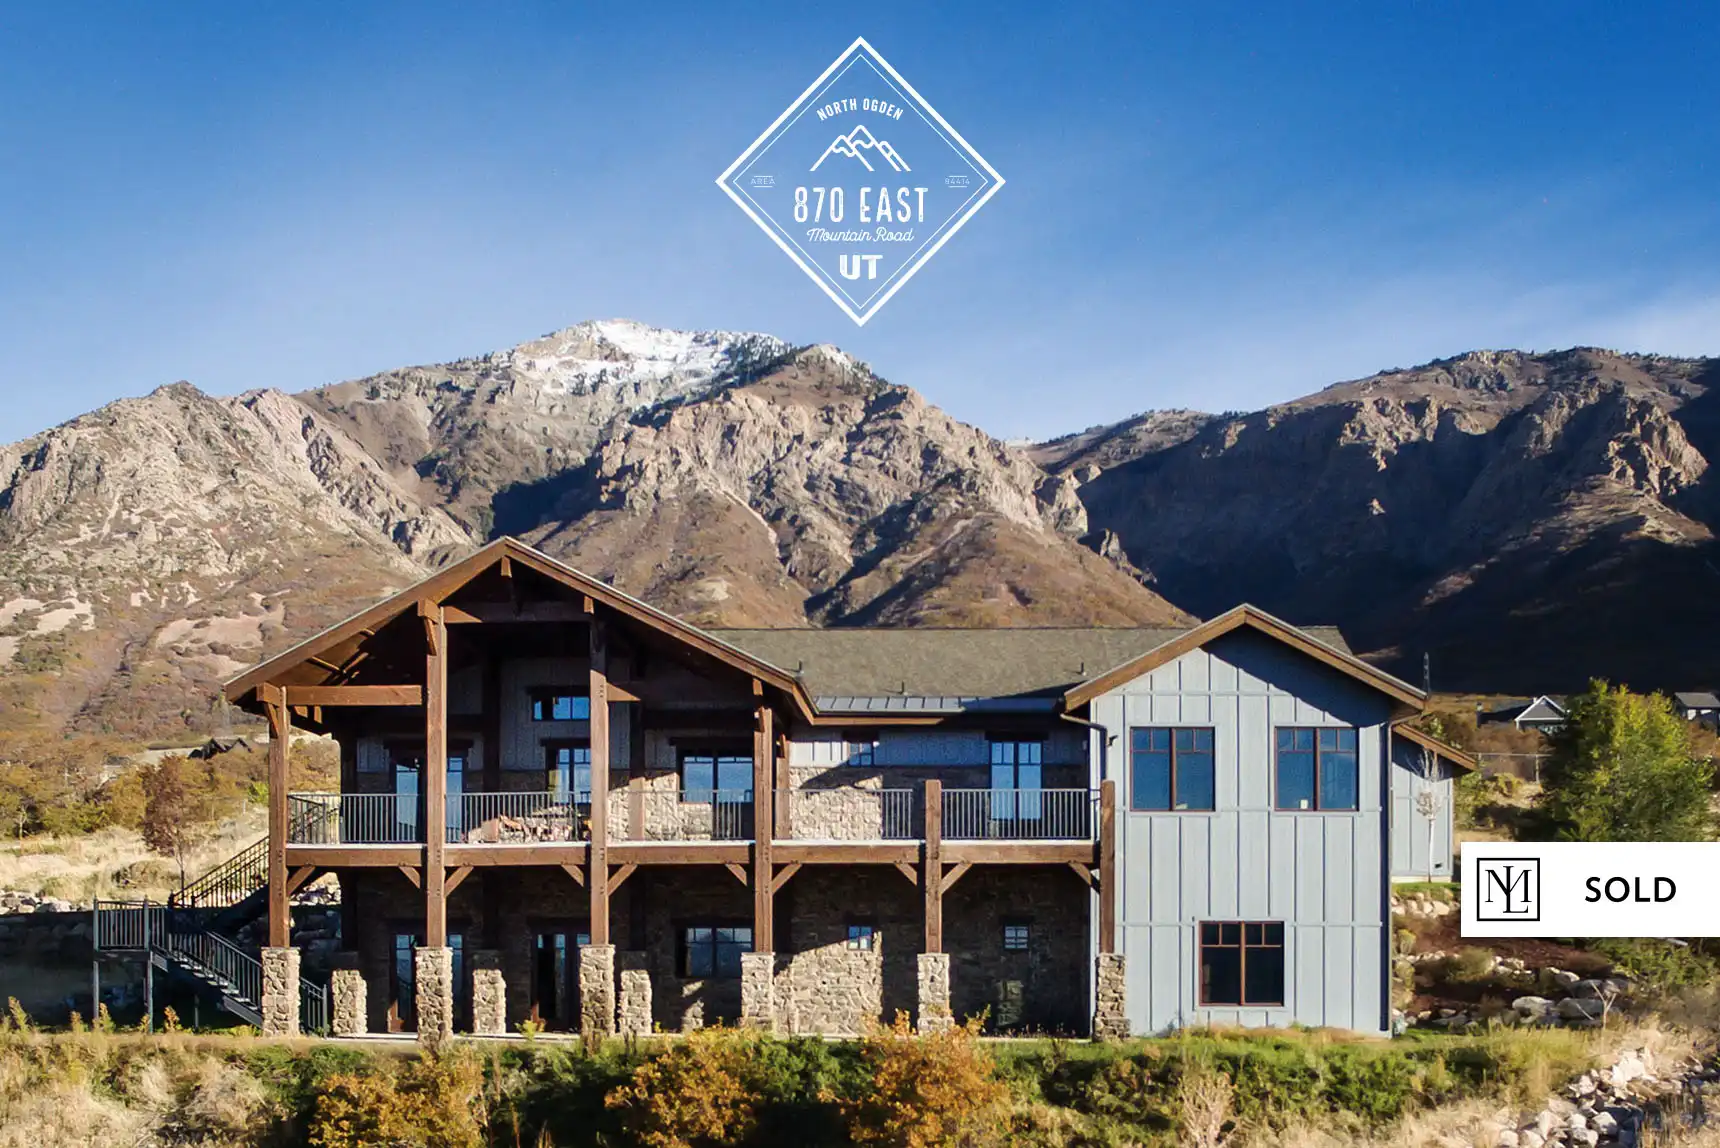 hero image for blog ** SOLD ** Stunning Views From This North Ogden Luxury Home